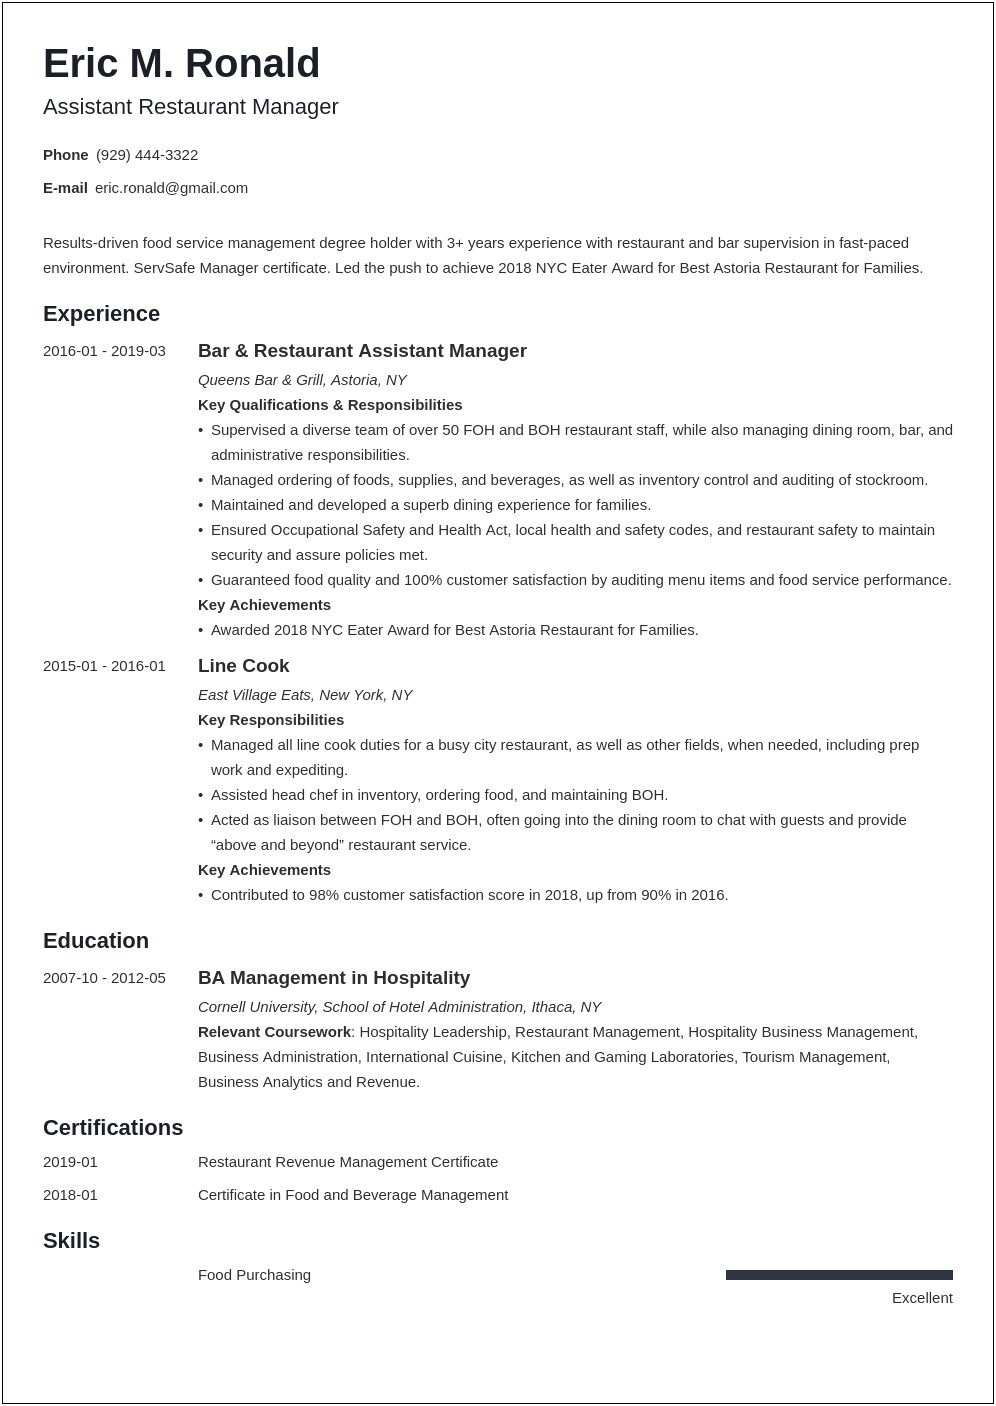 Resume Format For Food Service Manager